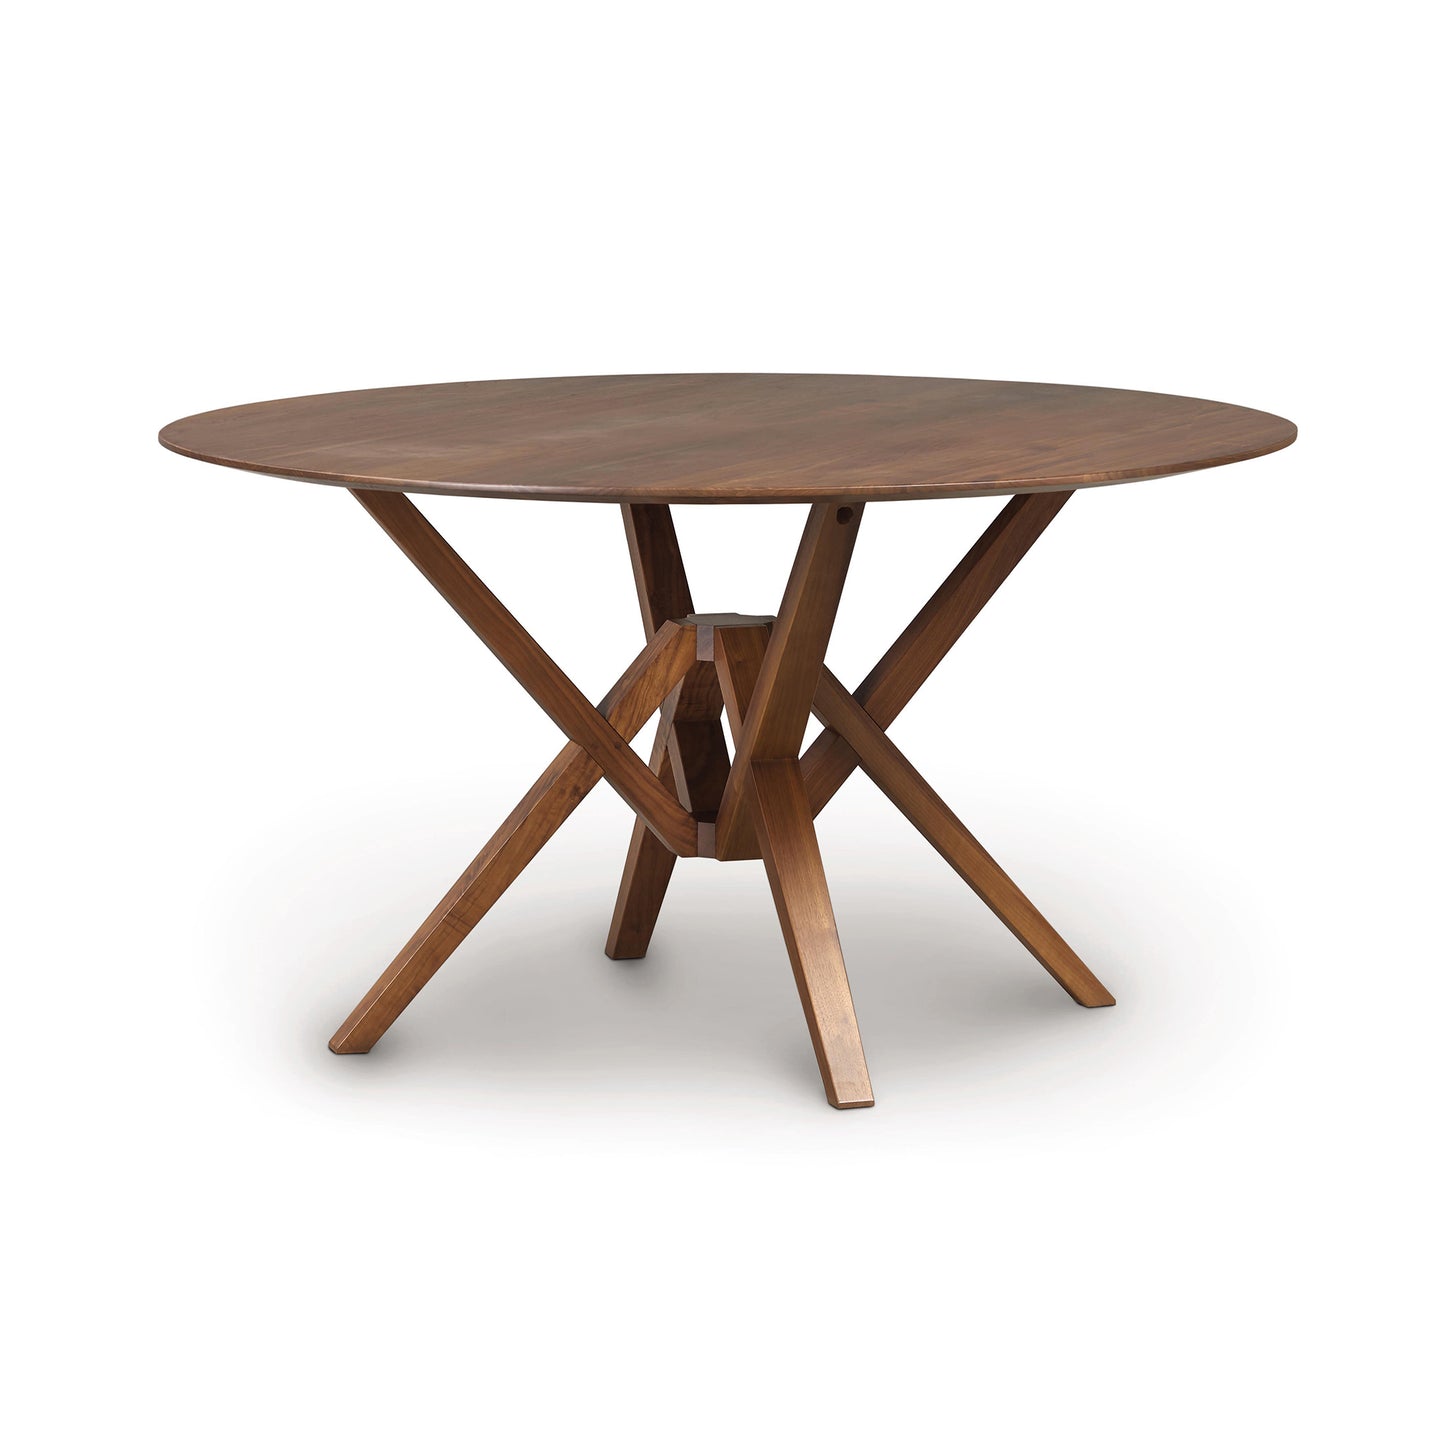 A Copeland Furniture Exeter Round Solid Top Dining Table with an intersecting base design, crafted from sustainably harvested hardwoods, isolated on a white background.